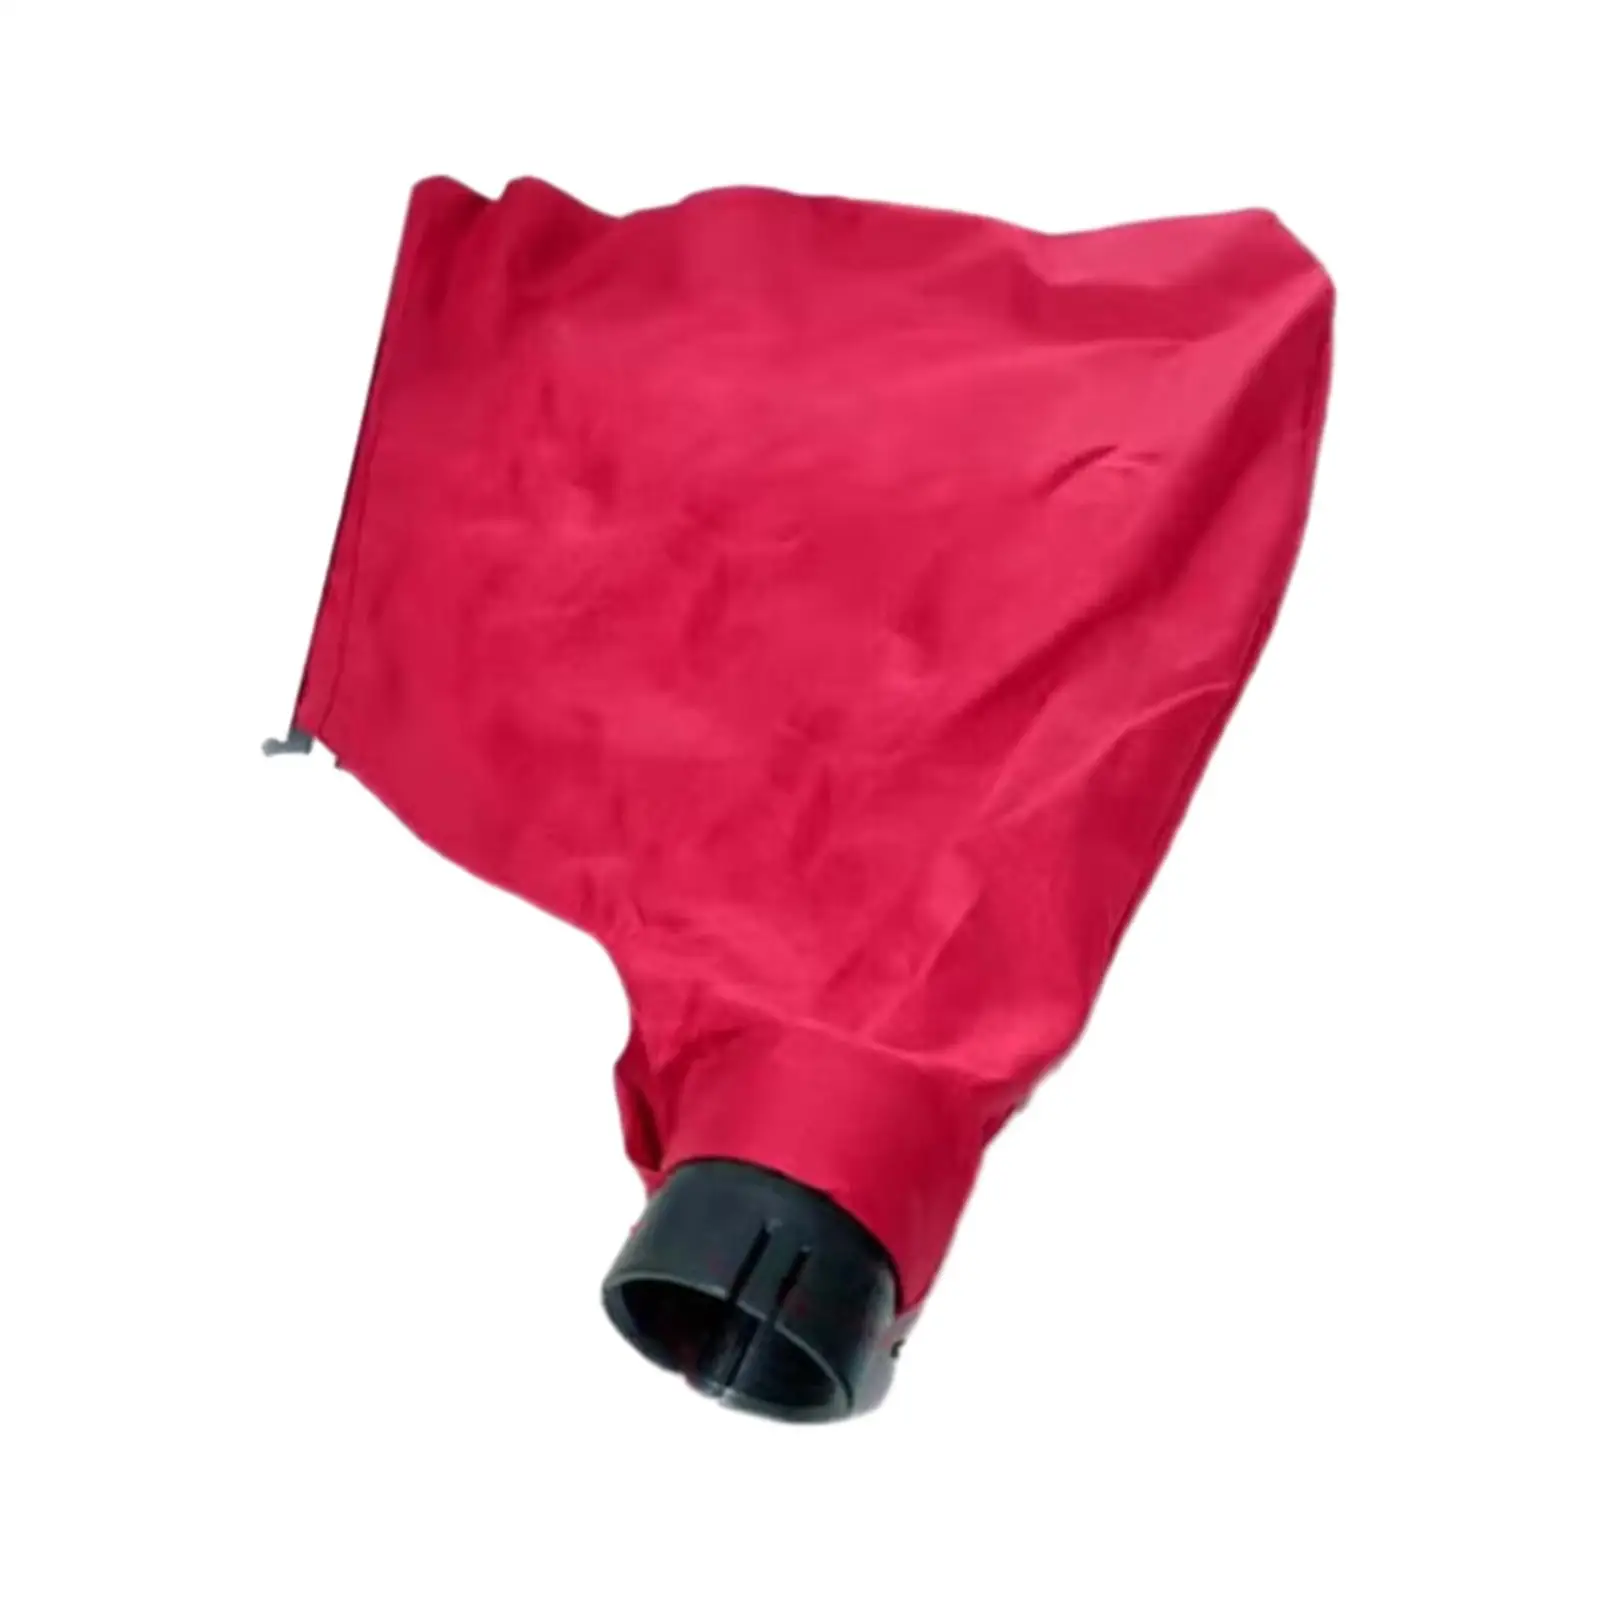 Dust Collection Bag Spare Parts Durable Anti Dust Cover Bag for 9403